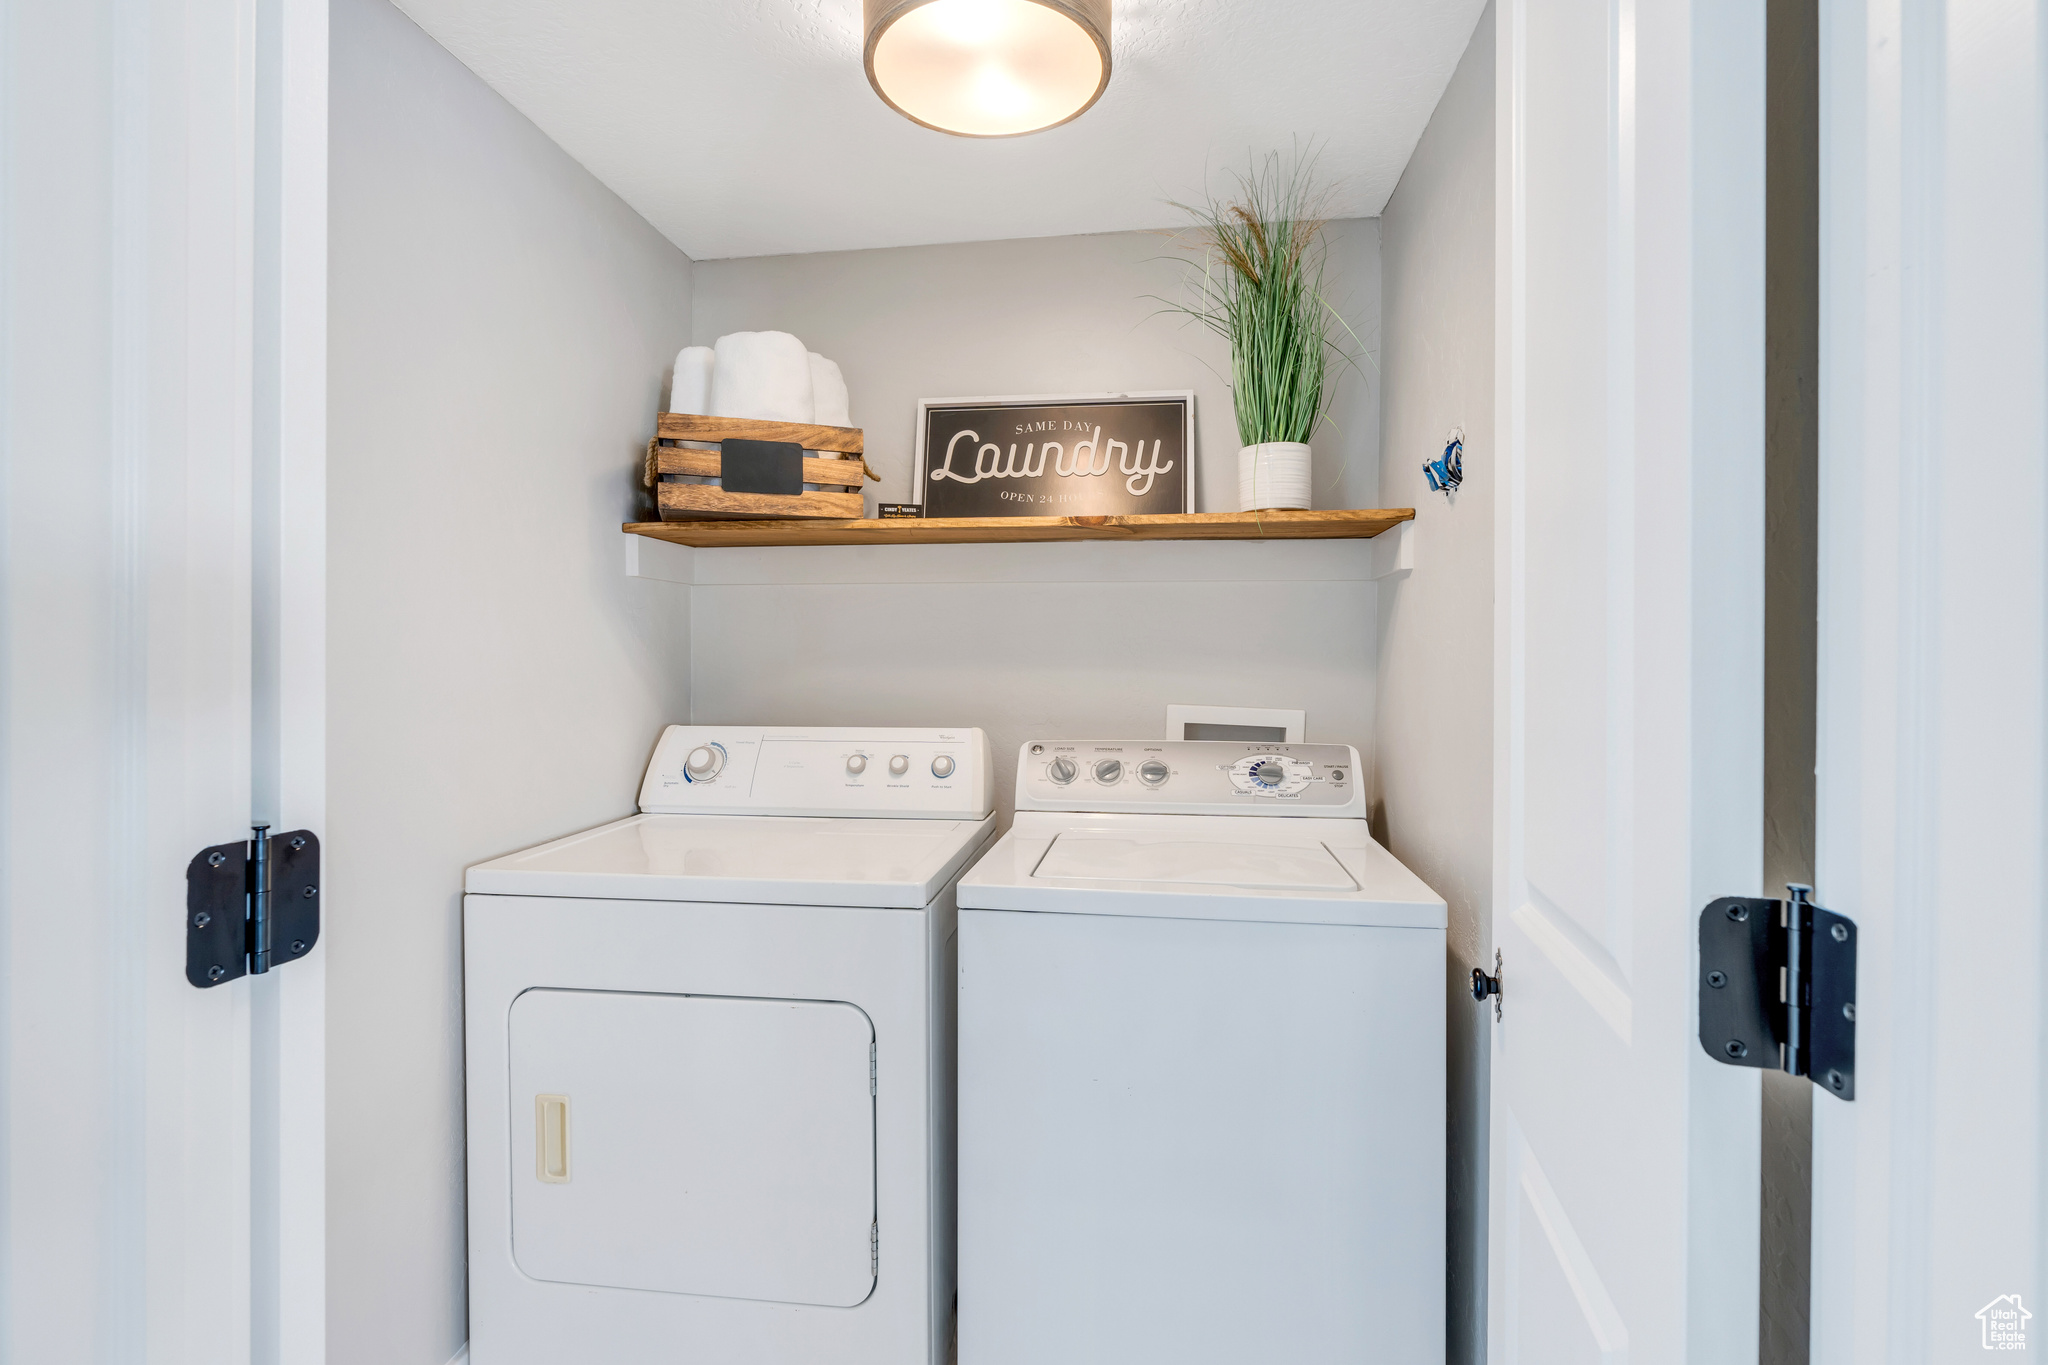 Laundry area with hookup for a washing machine and washer and clothes dryer